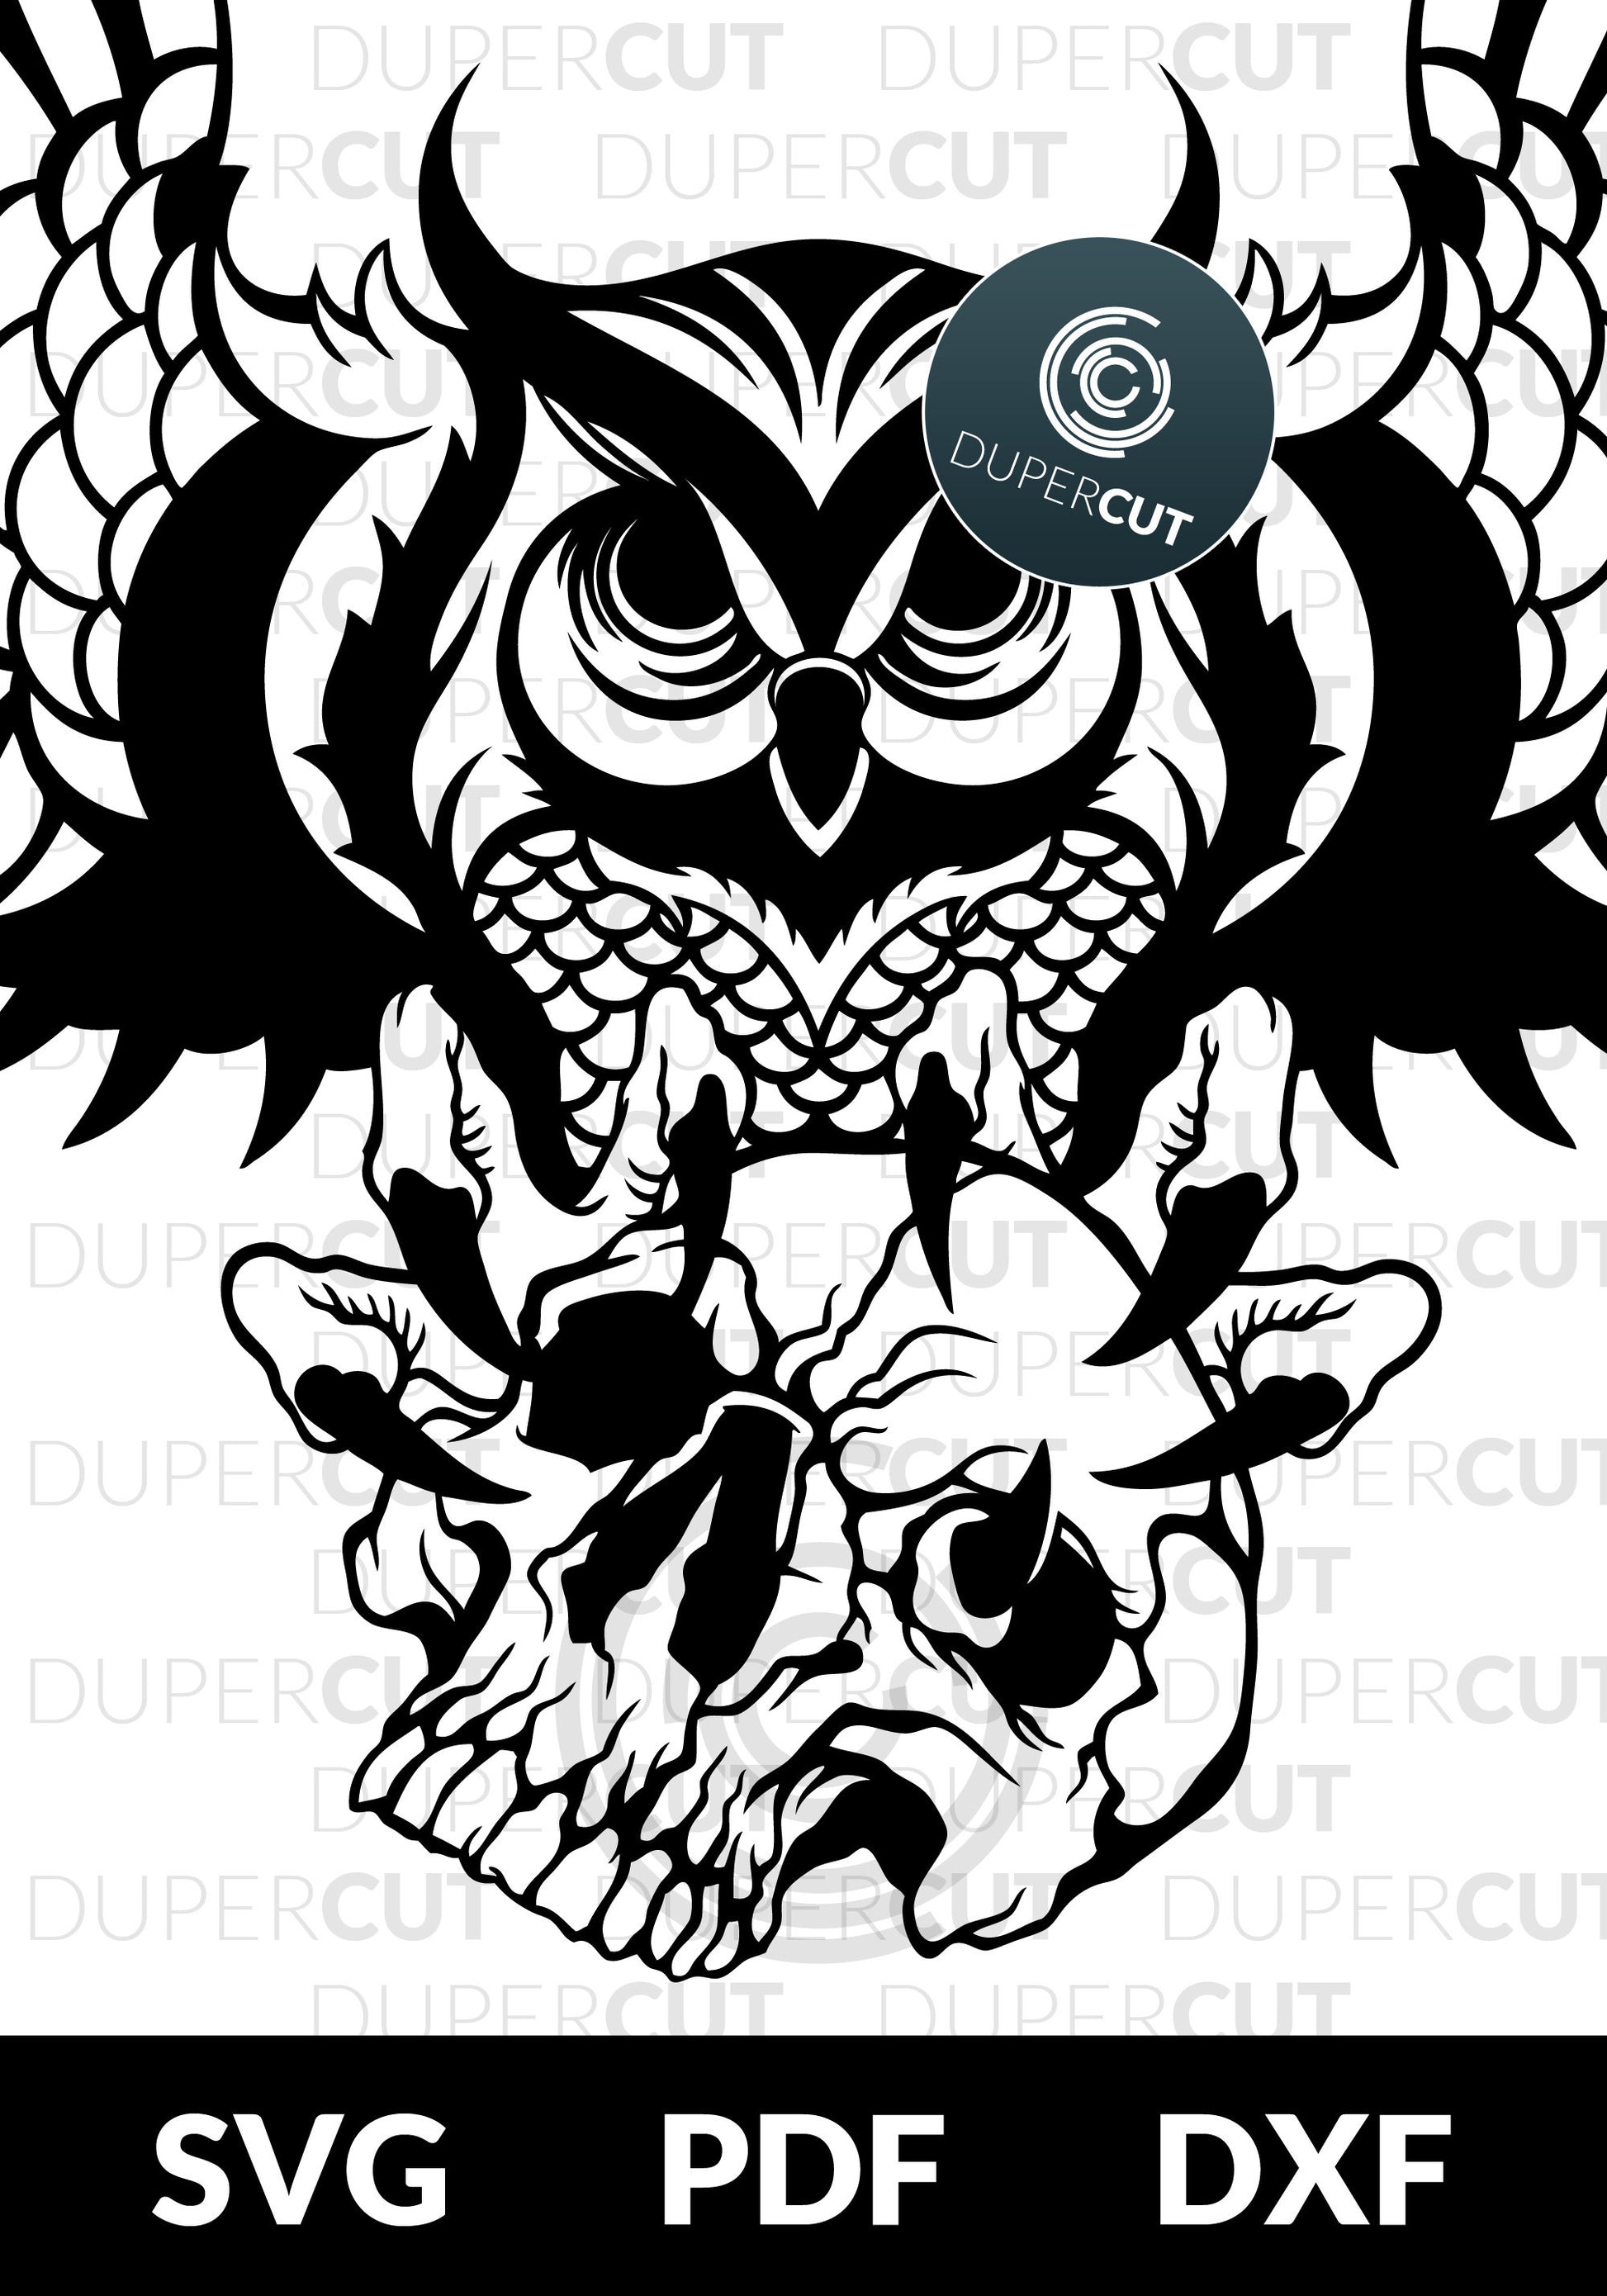 Gothic art owl with skull, tattoo style - SVG DXF JPEG files for CNC machines, laser cutting, Cricut, Silhouette Cameo, Glowforge engraving